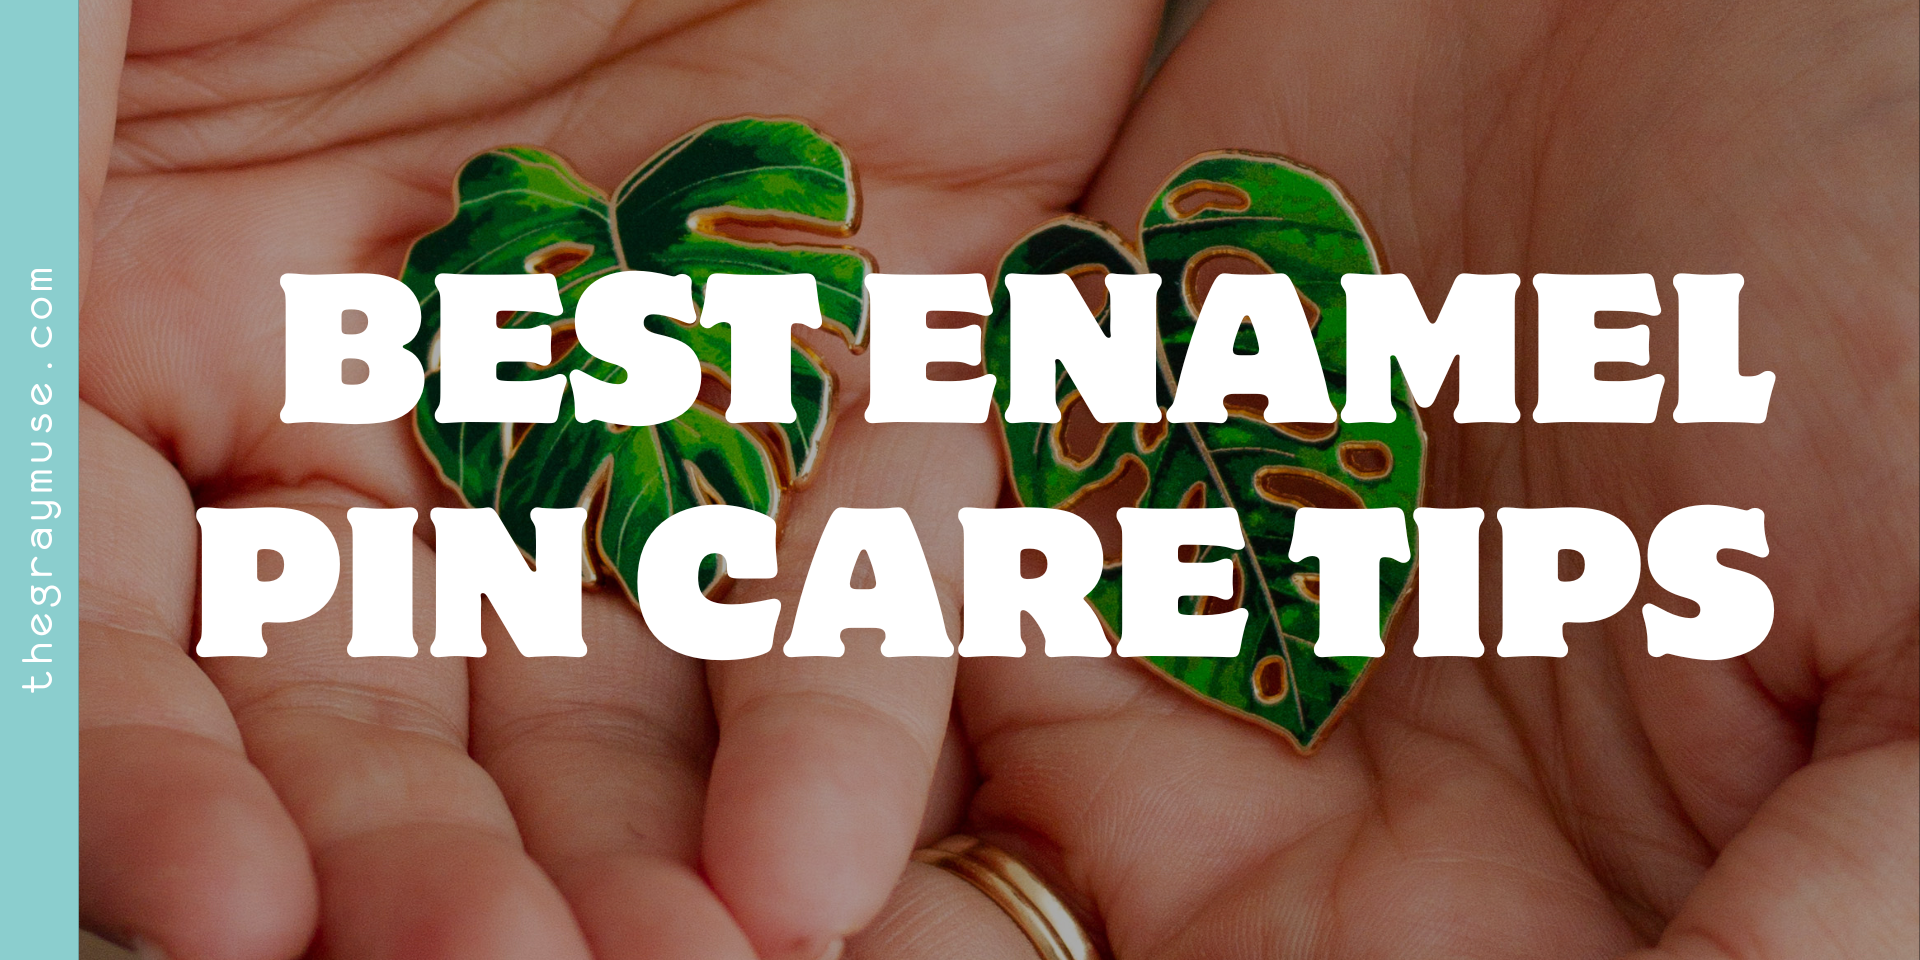 the best enamel pin care tips